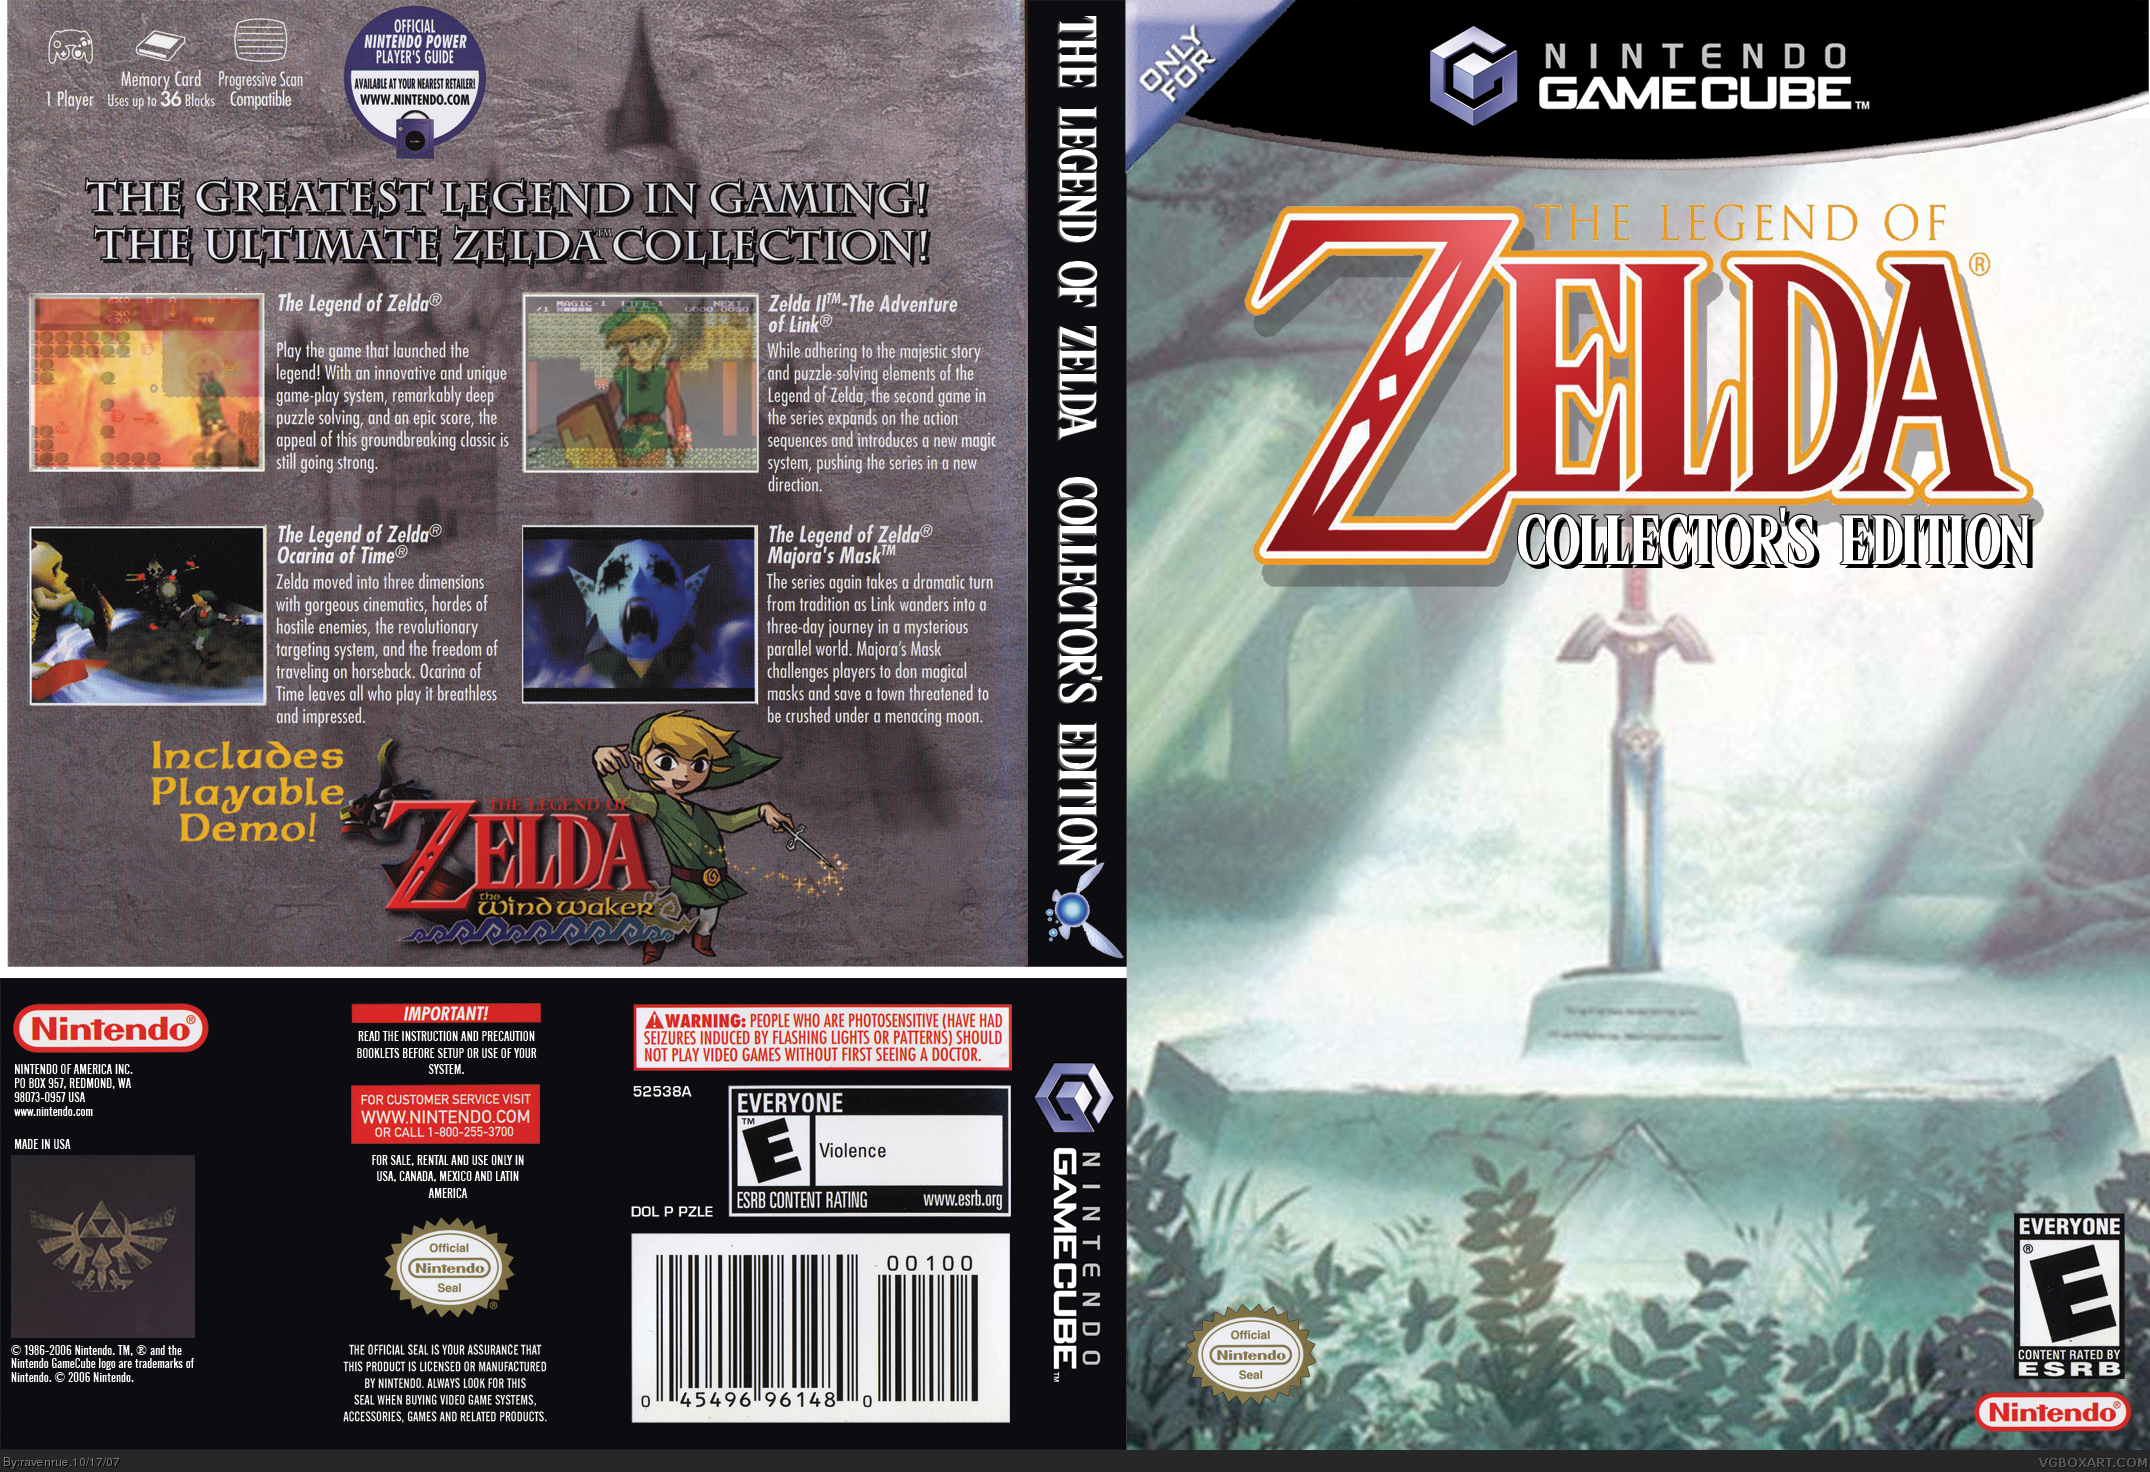 Viewing full size The Legend of Zelda Collector's Edition box cover